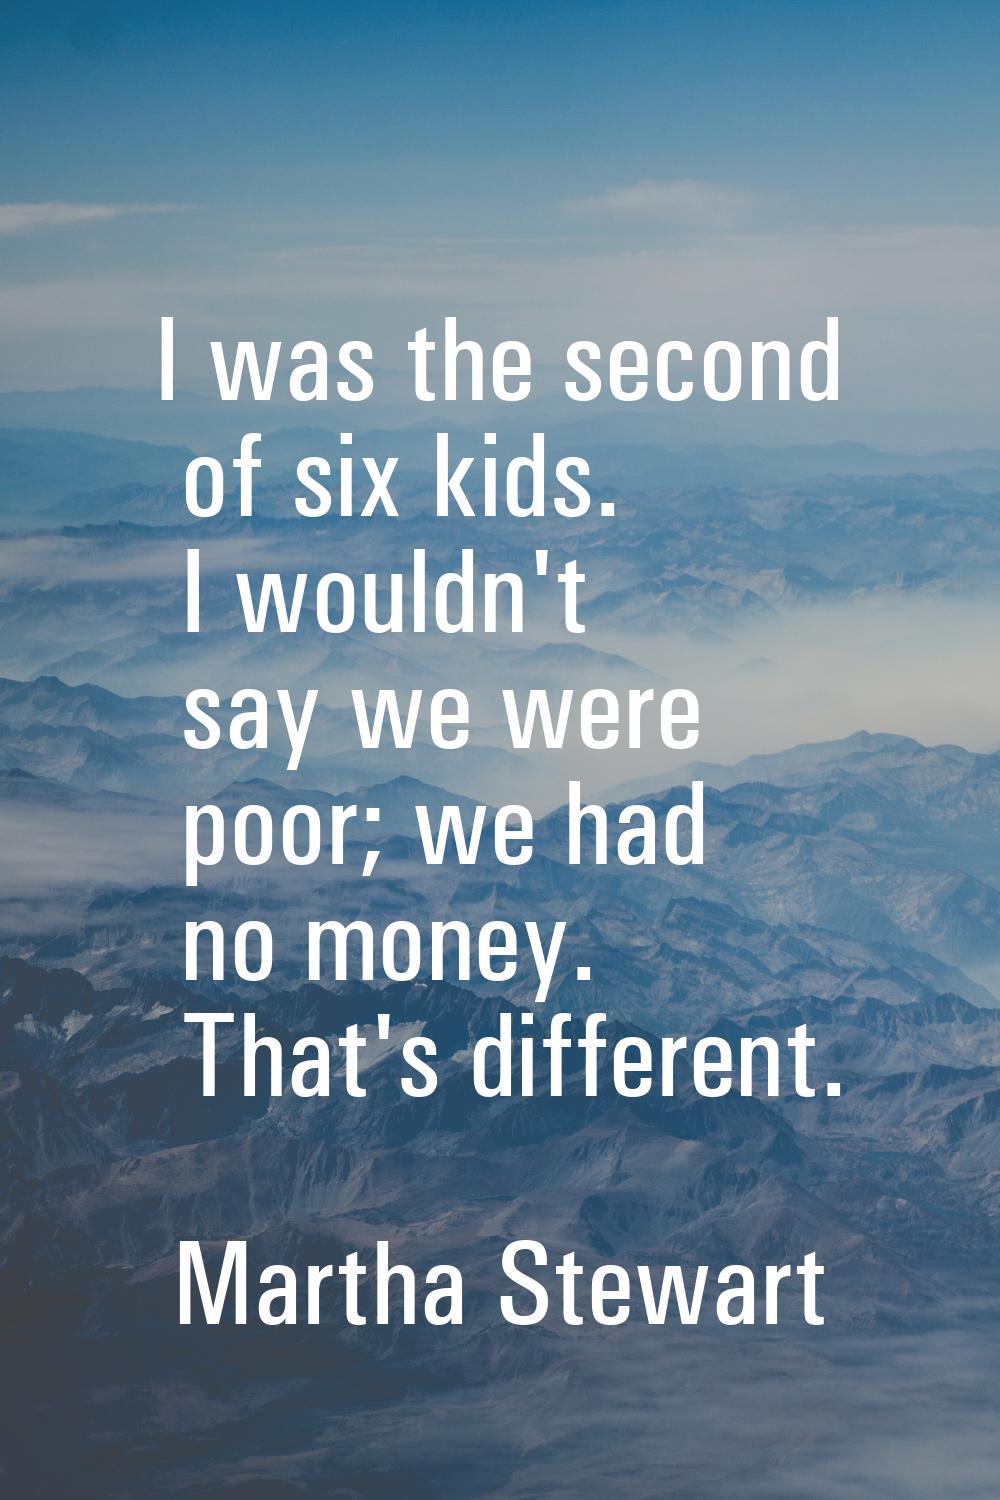 I was the second of six kids. I wouldn't say we were poor; we had no money. That's different.